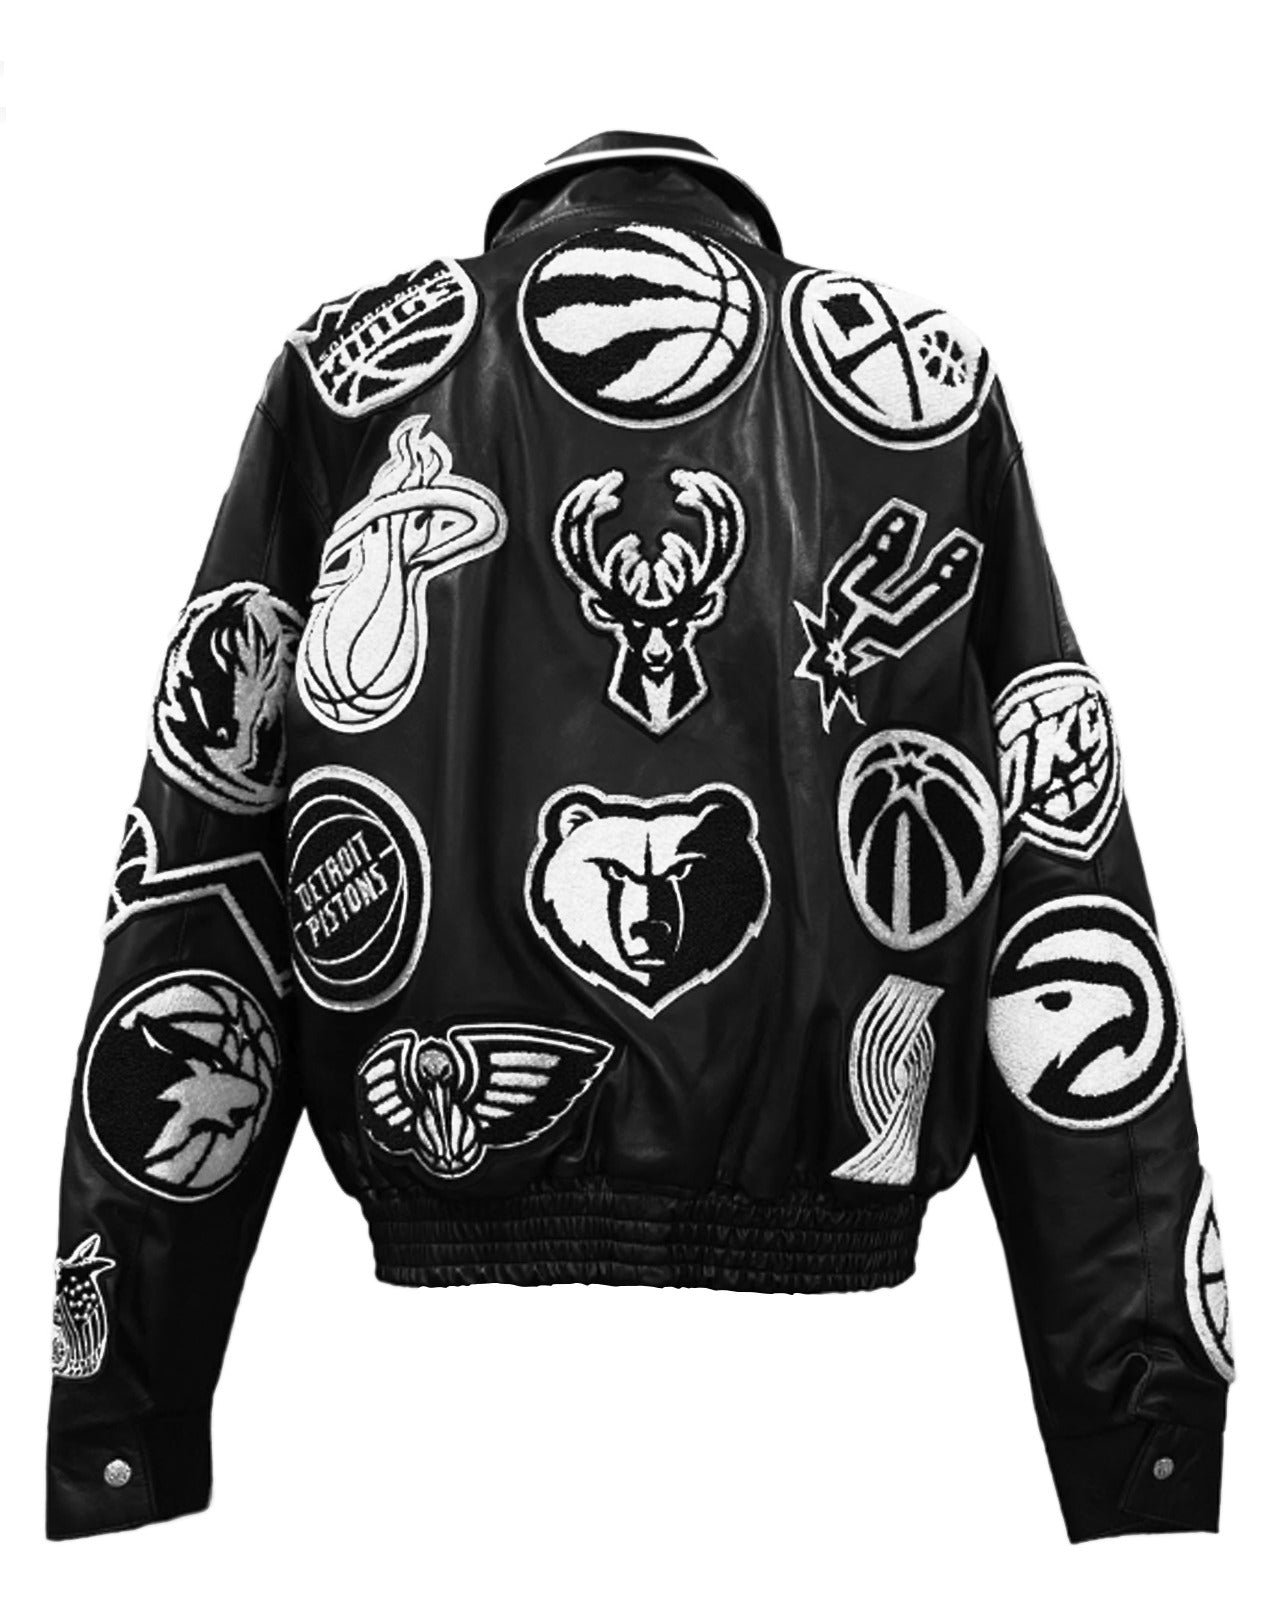 LIMITED EDITION 50TH ANNIVERSARY OF HIP-HOP NBA COLLAGE FULL LEATHER BLACK & WHITE